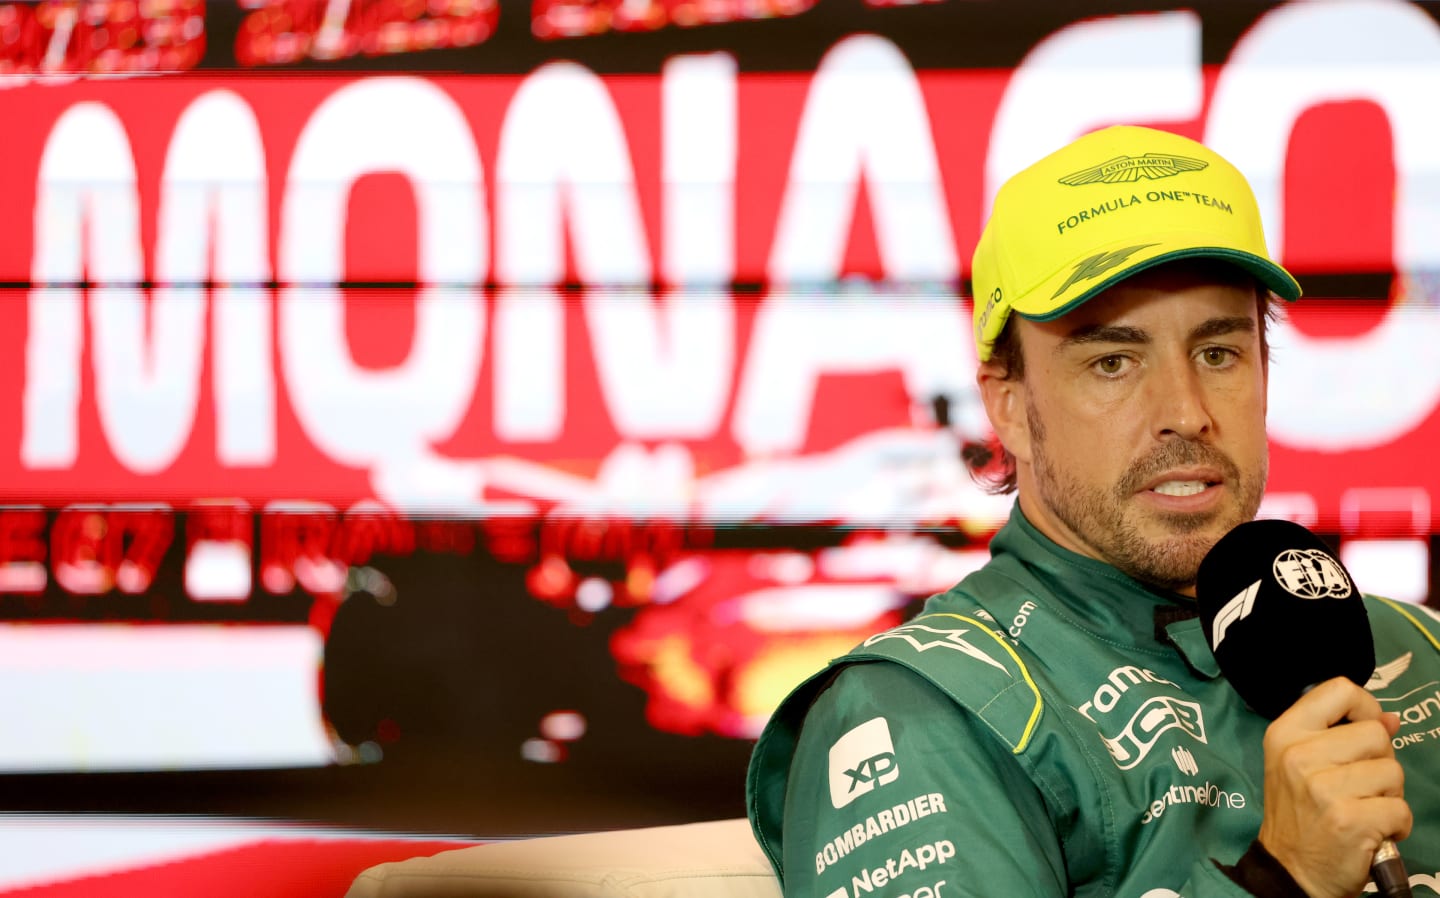 MONTE-CARLO, MONACO - MAY 27: Second placed qualifier Fernando Alonso of Spain and Aston Martin F1 Team attends the press conference after qualifying ahead of the F1 Grand Prix of Monaco at Circuit de Monaco on May 27, 2023 in Monte-Carlo, Monaco. (Photo by Bryn Lennon/Getty Images)